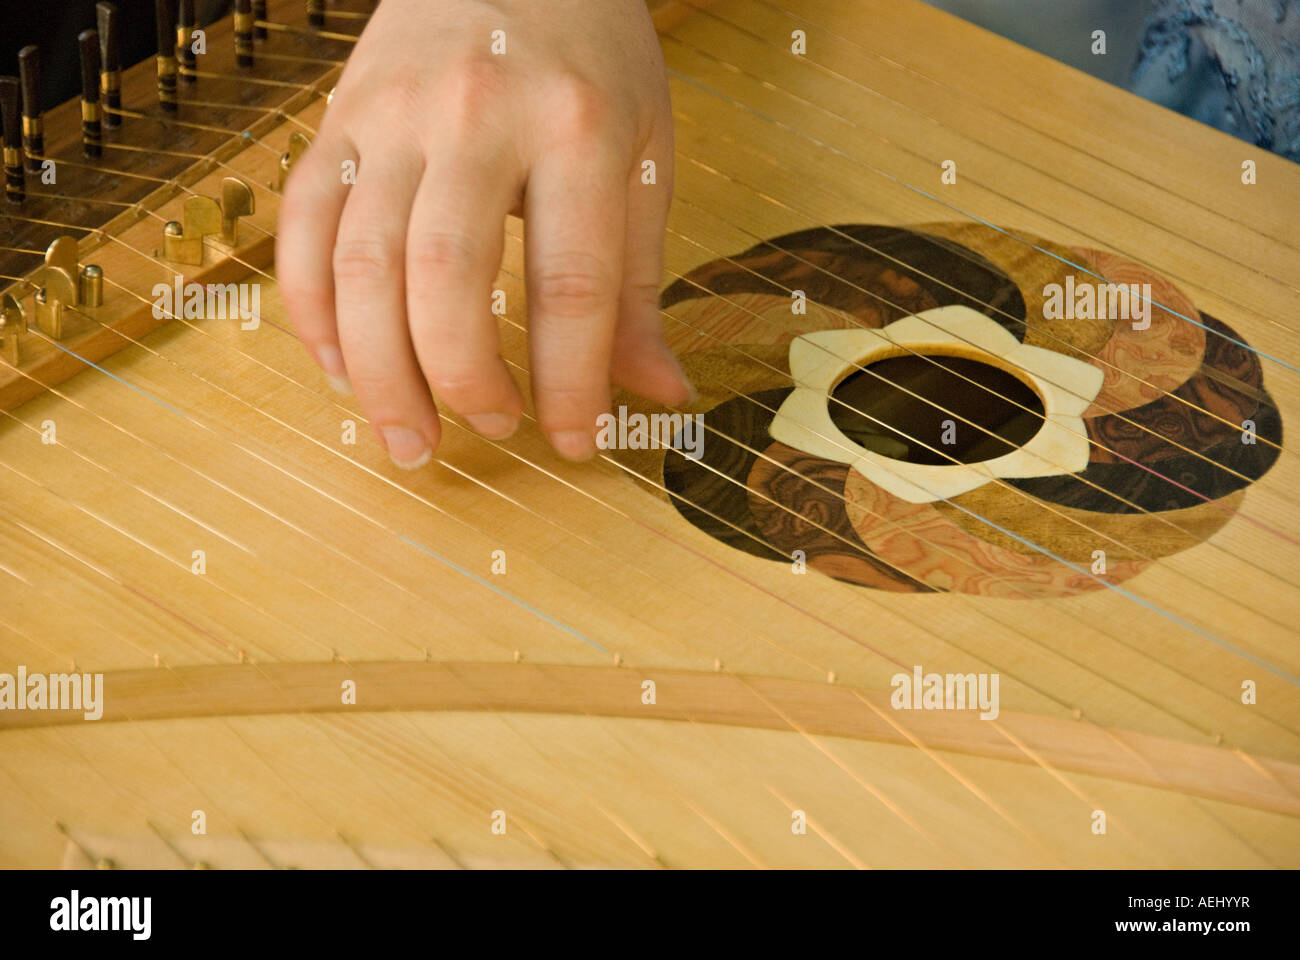 Musician pinching the strings of a cythare. Stock Photo